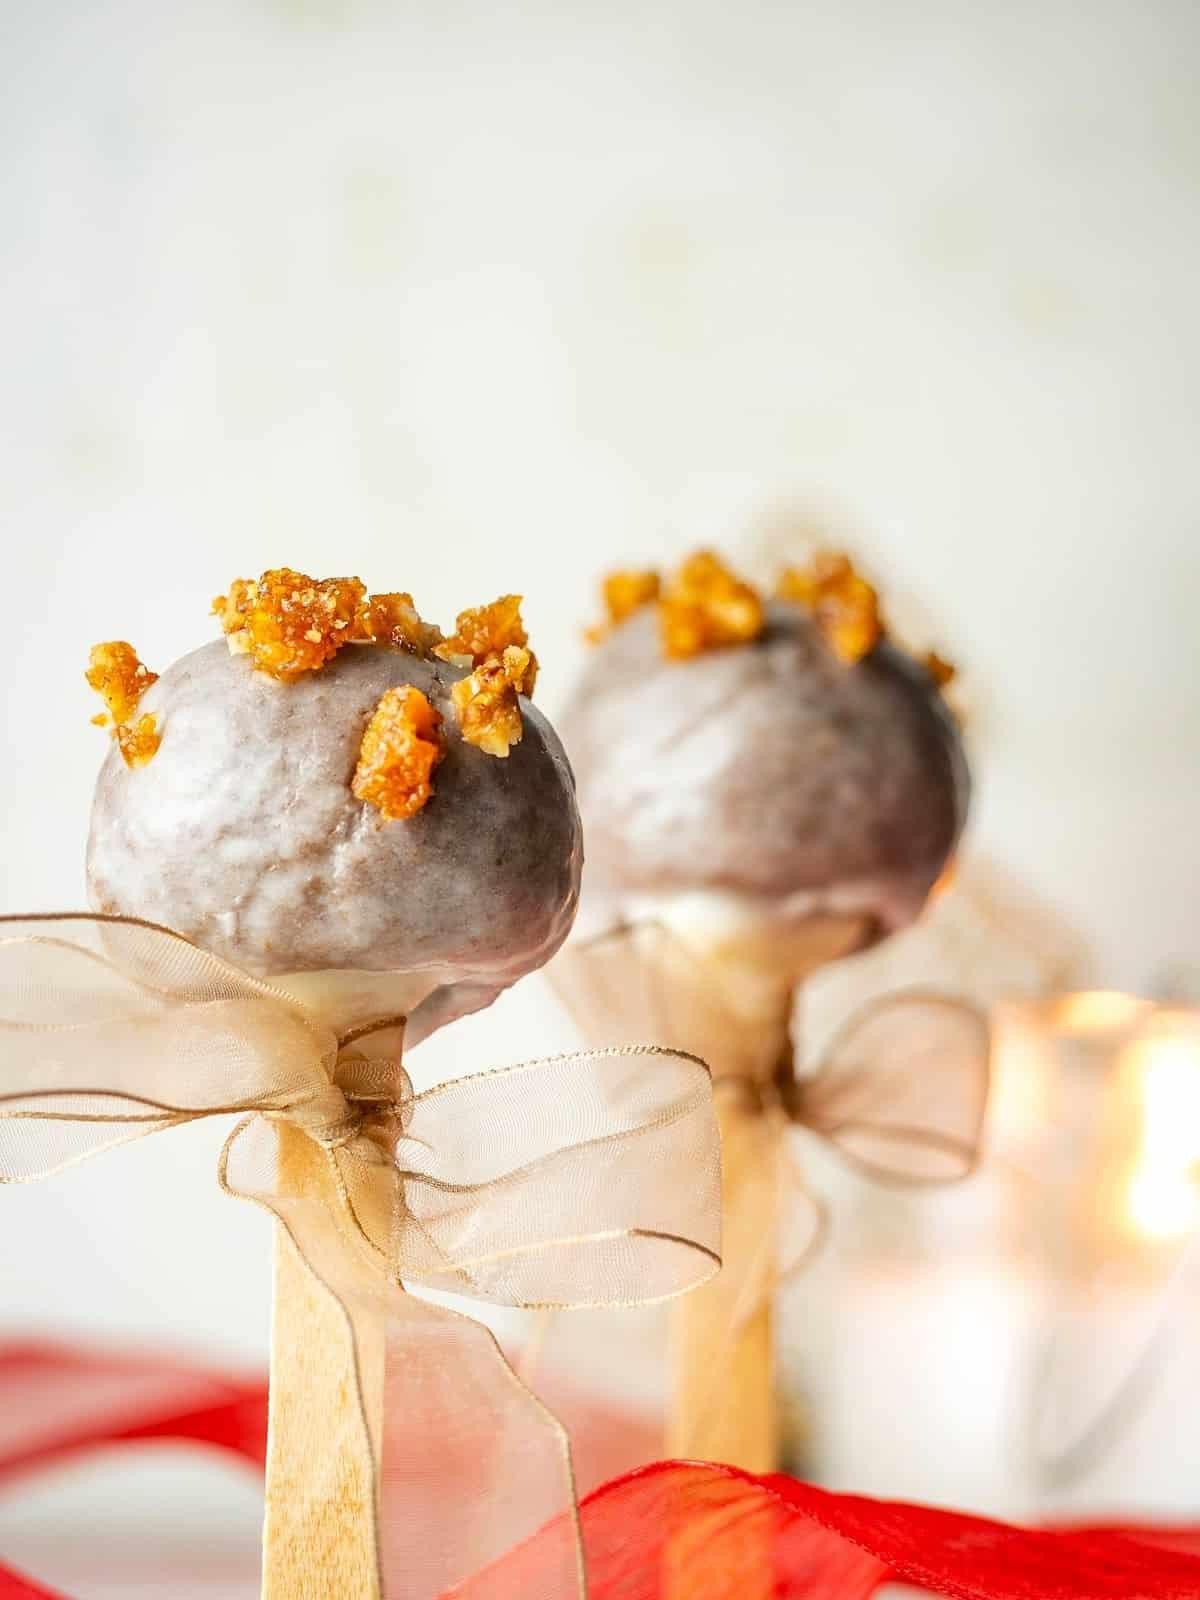 Sugar glazed covered cake pops on stick sprinkled with chopped pralines. 